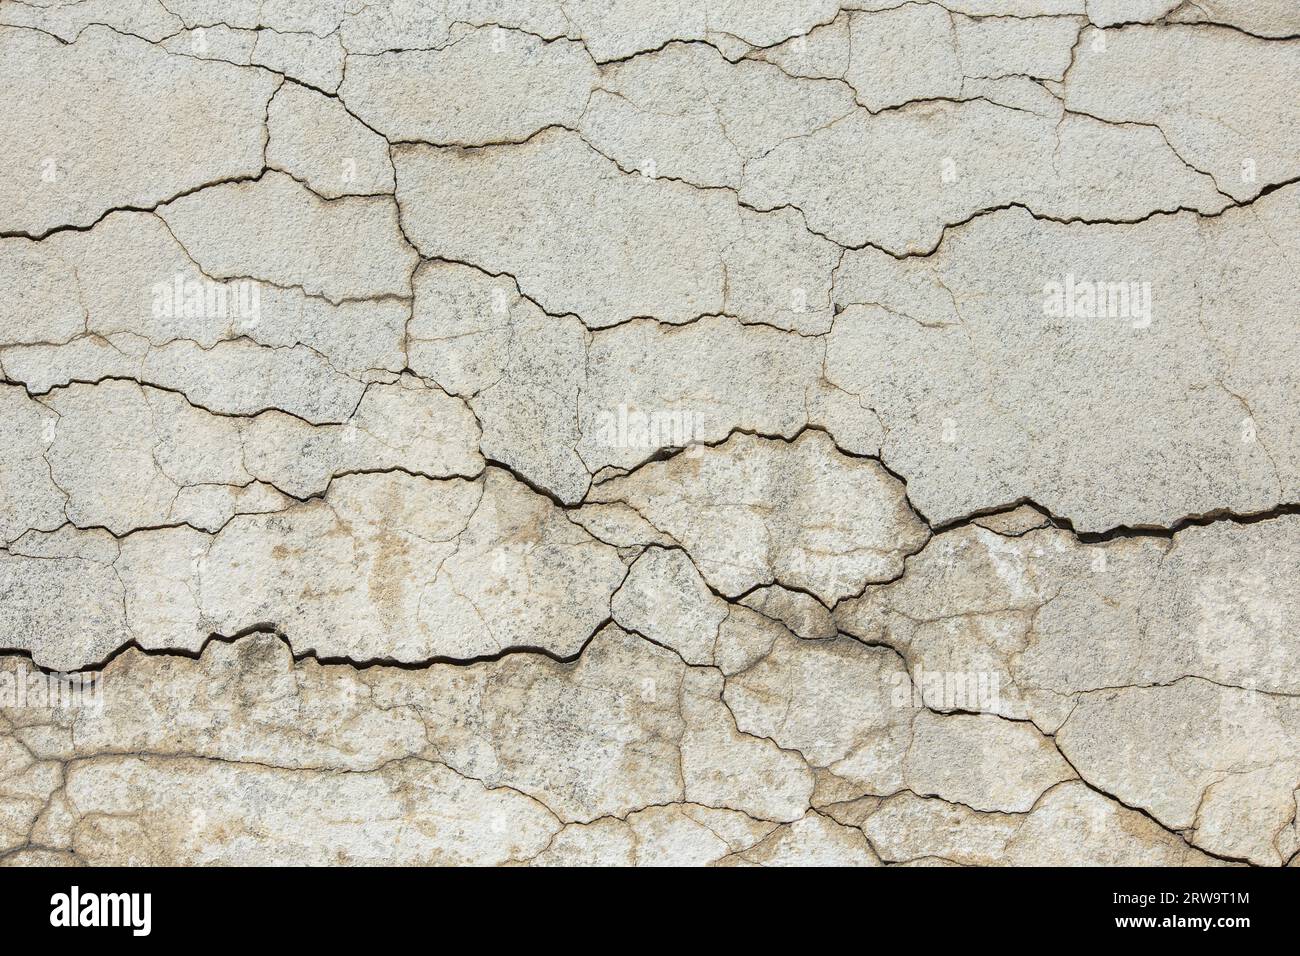 deep horizontal cracks on old wall plaster - full-frame texture and background Stock Photo